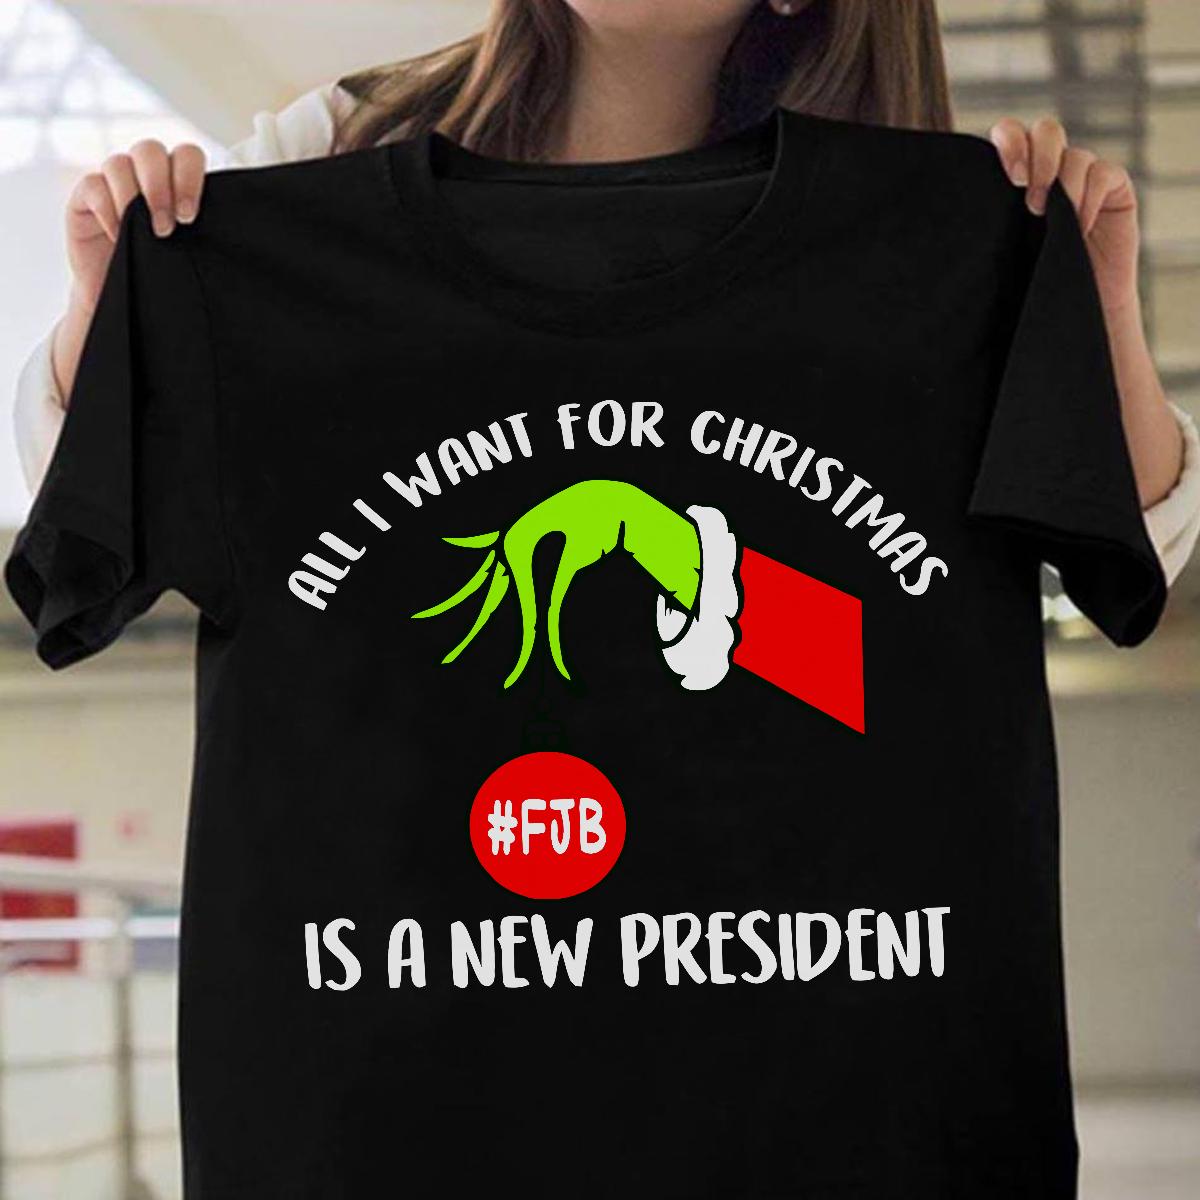 FJB Shirt, Christmas Day Gift - All i want for christmas is a new president